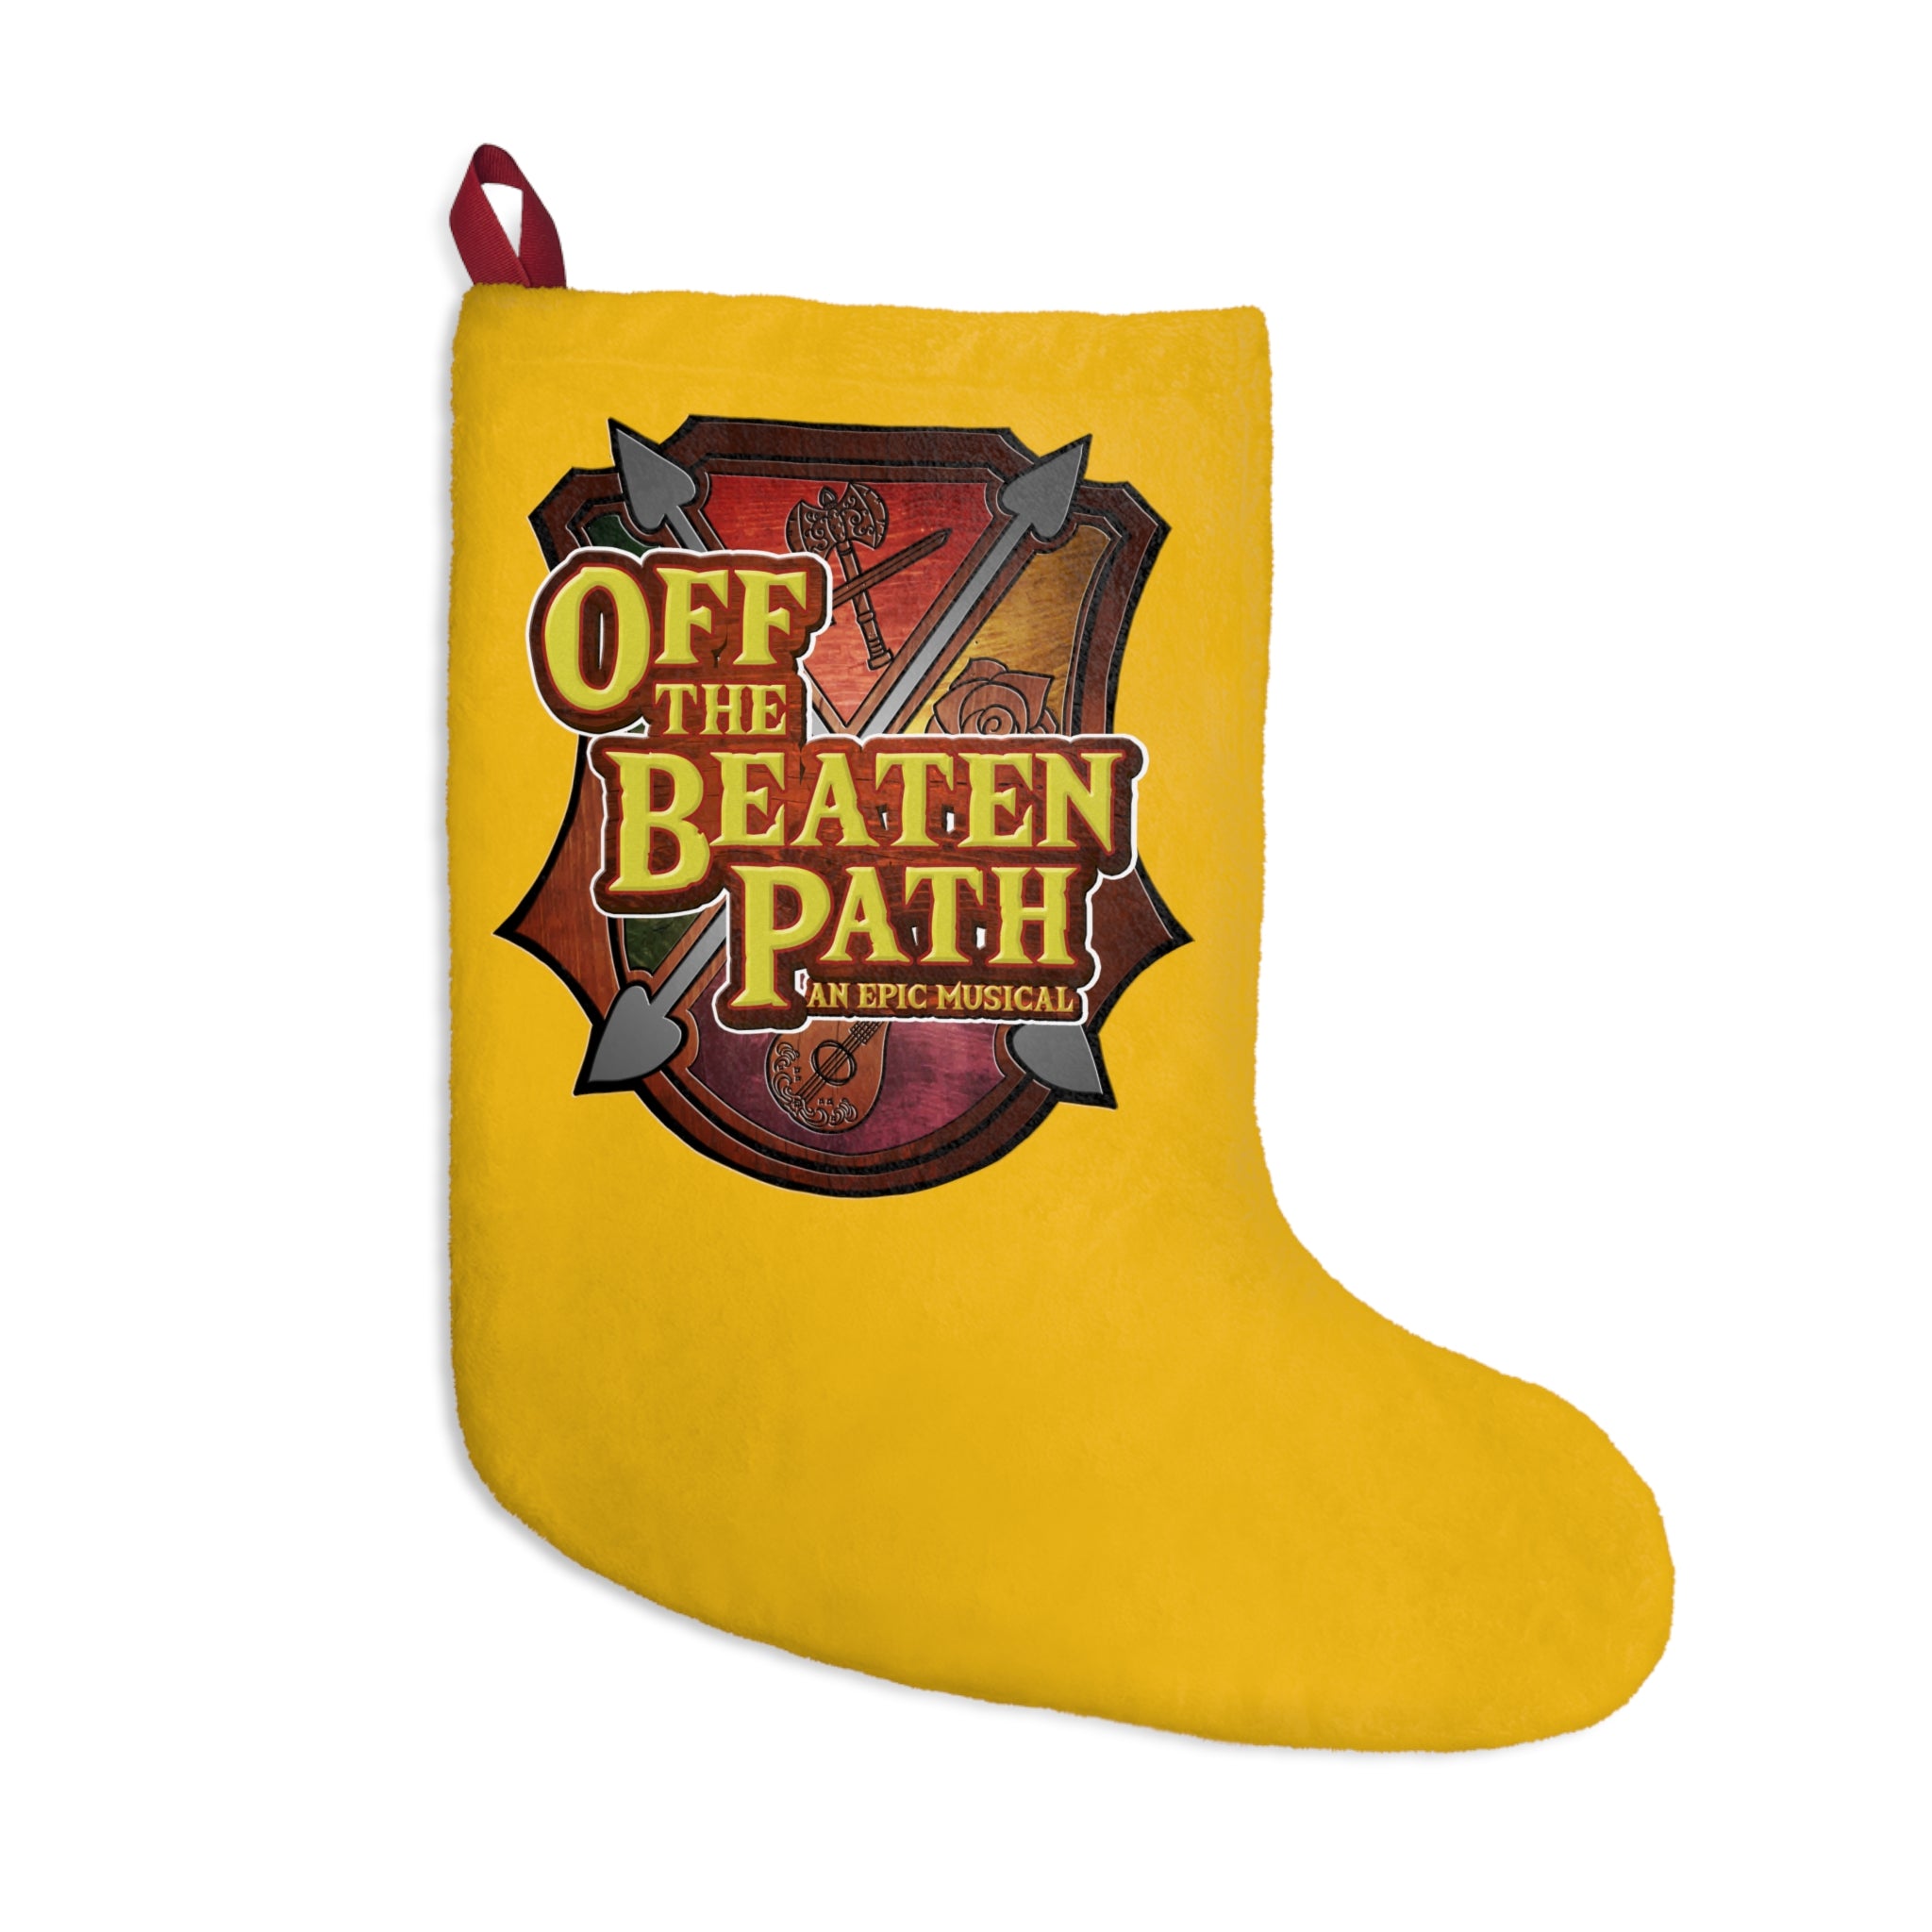 OBP Crest Christmas Stocking - Yellow